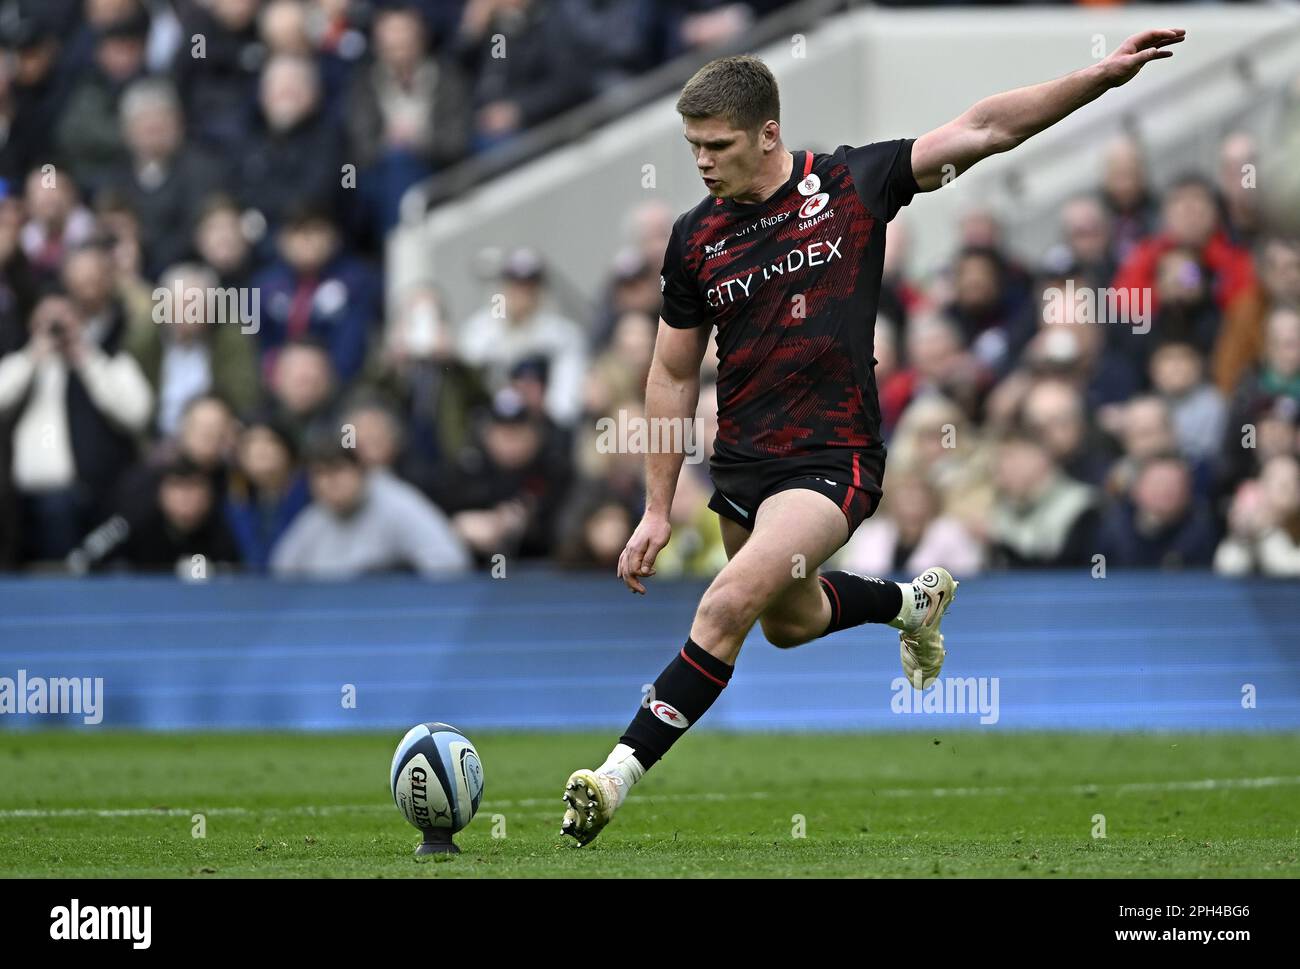 Tottenham, United Kingdom. 25th Mar, 2023. Premiership Rugby. Saracens V Harlequins. The Tottenham Hotspur Stadium. Tottenham. Owen Farrell (Saracens, captain) kicks during the Showdown 3, in Association with City Index, Saracens V Harlequins Gallagher Premiership rugby match. Credit: Sport In Pictures/Alamy Live News Stock Photo